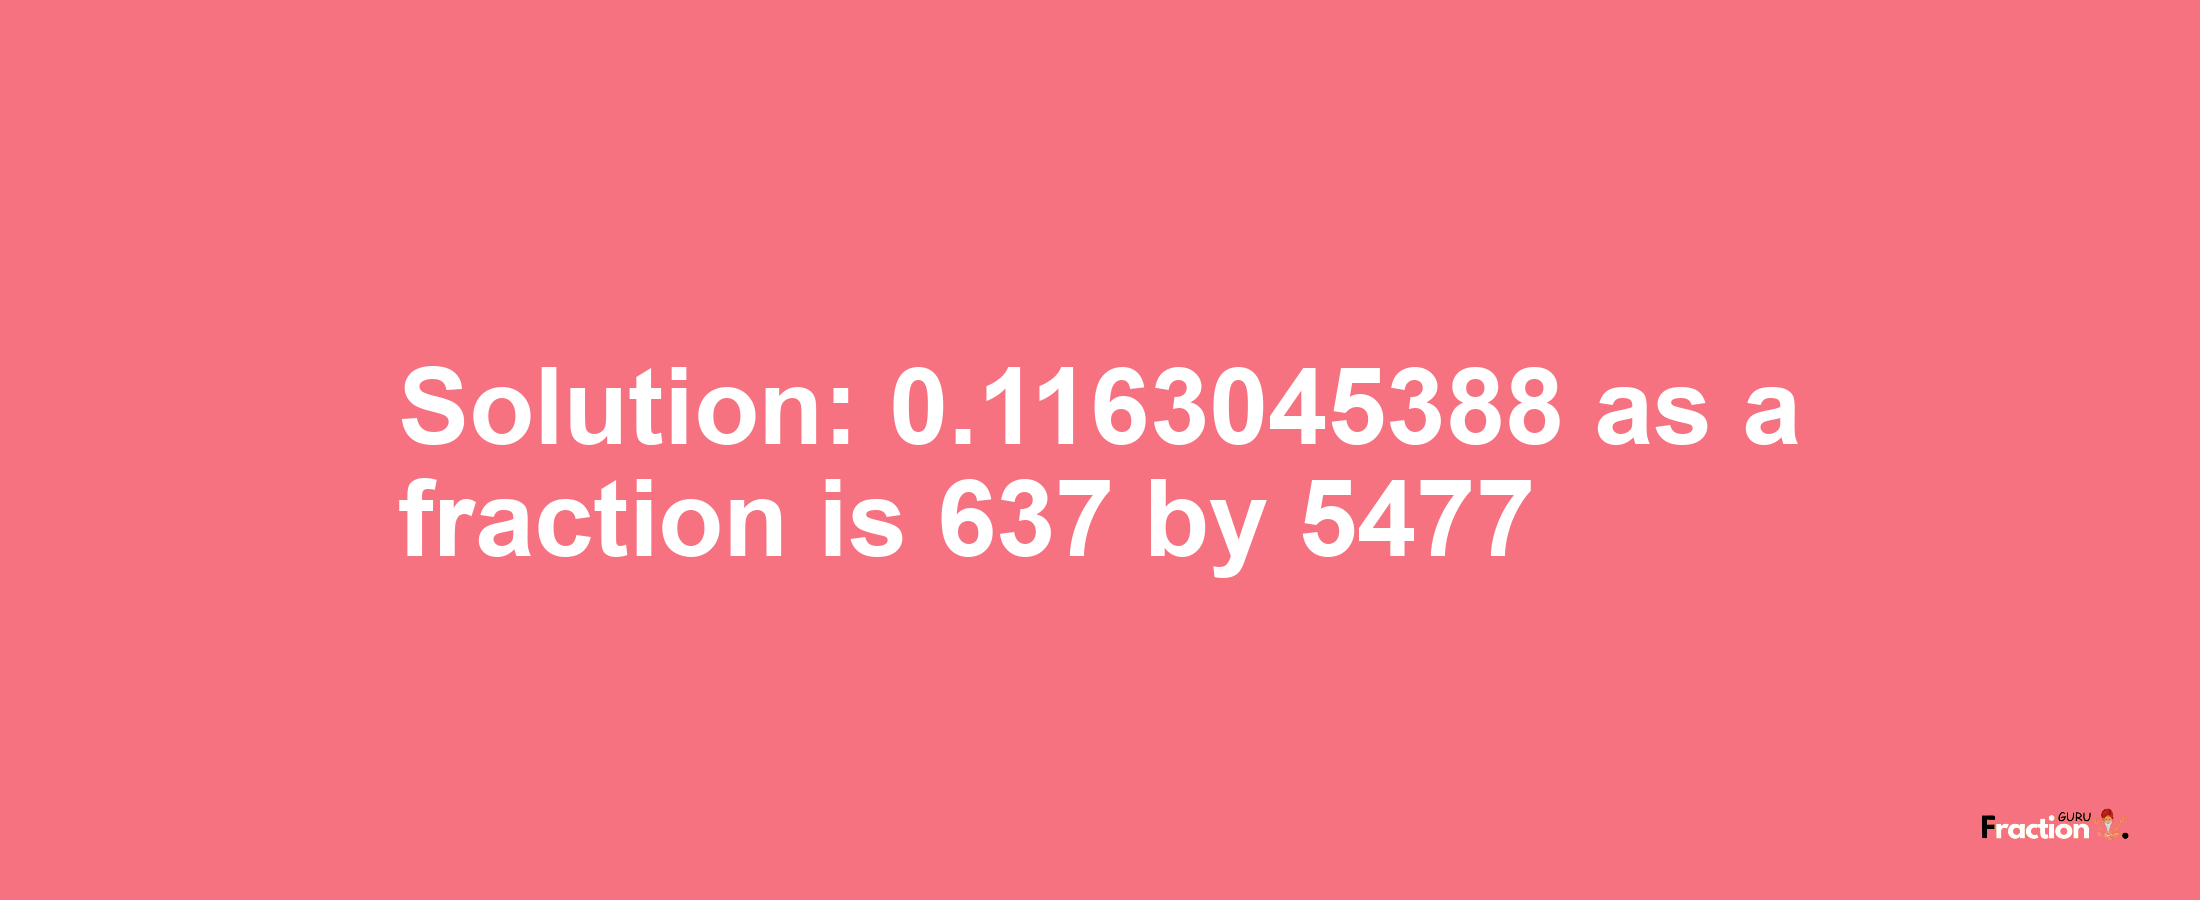 Solution:0.1163045388 as a fraction is 637/5477